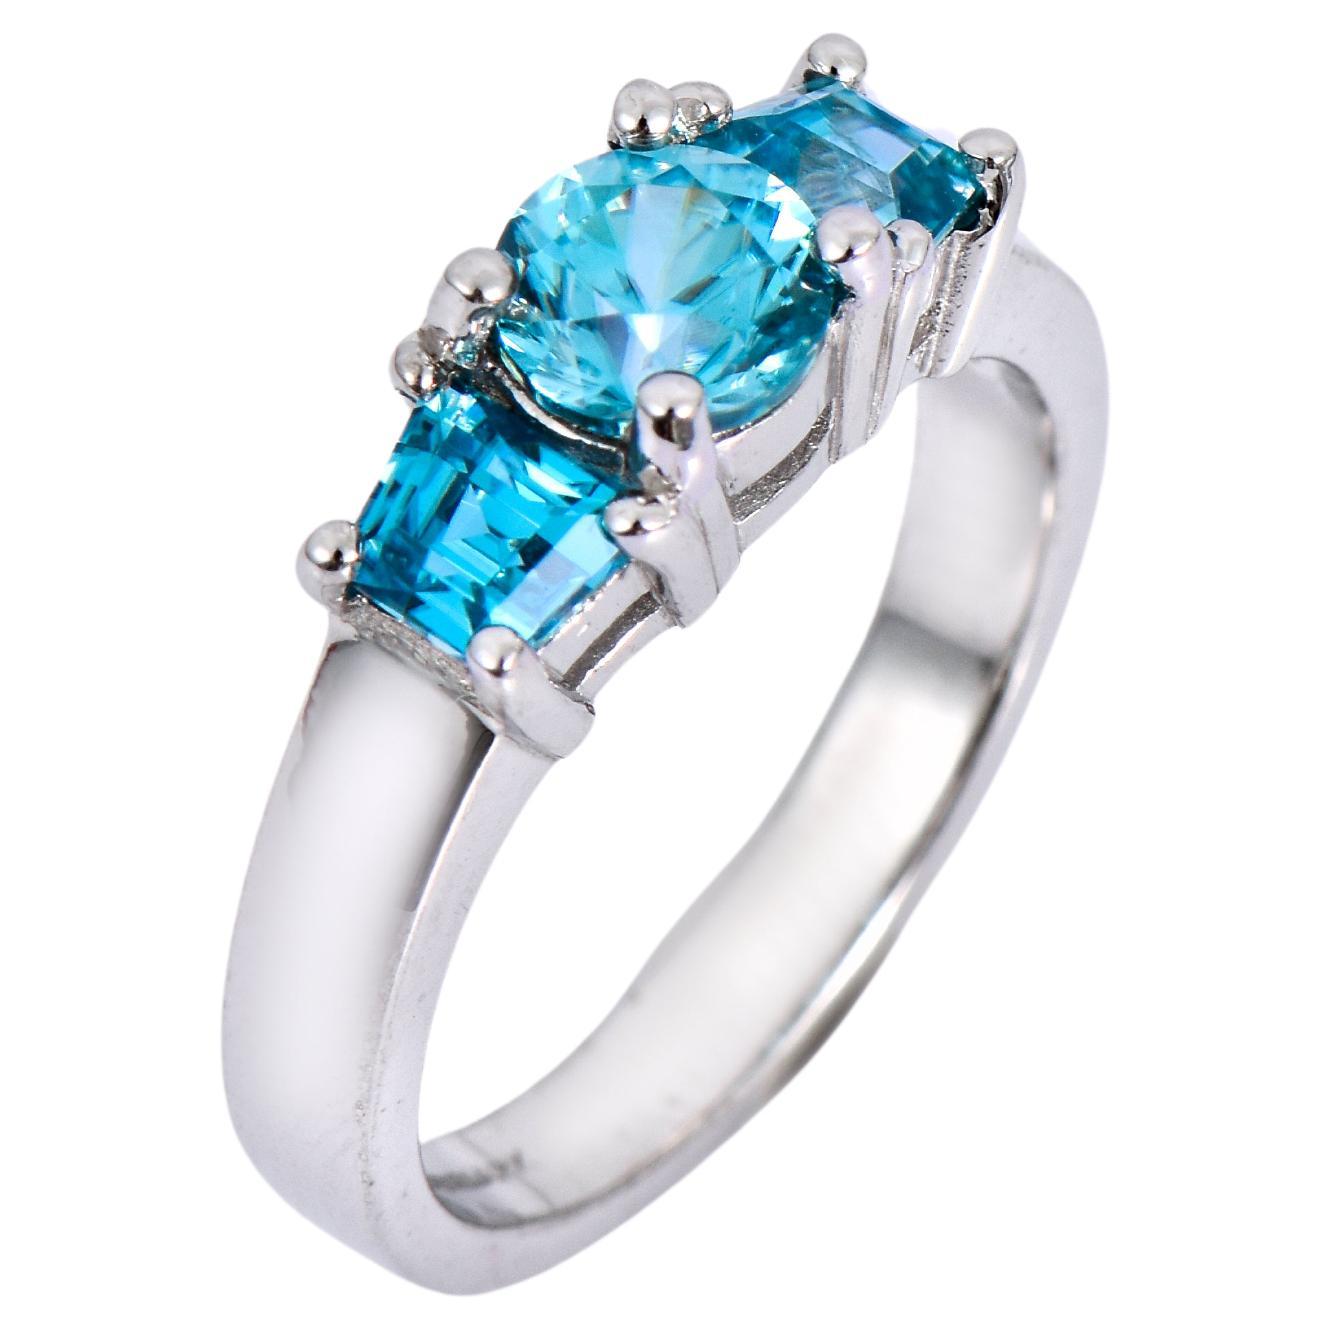 Orloff of Denmark, 2.65 ct Natural Blue Zircon Ring in 925 Sterling Silver